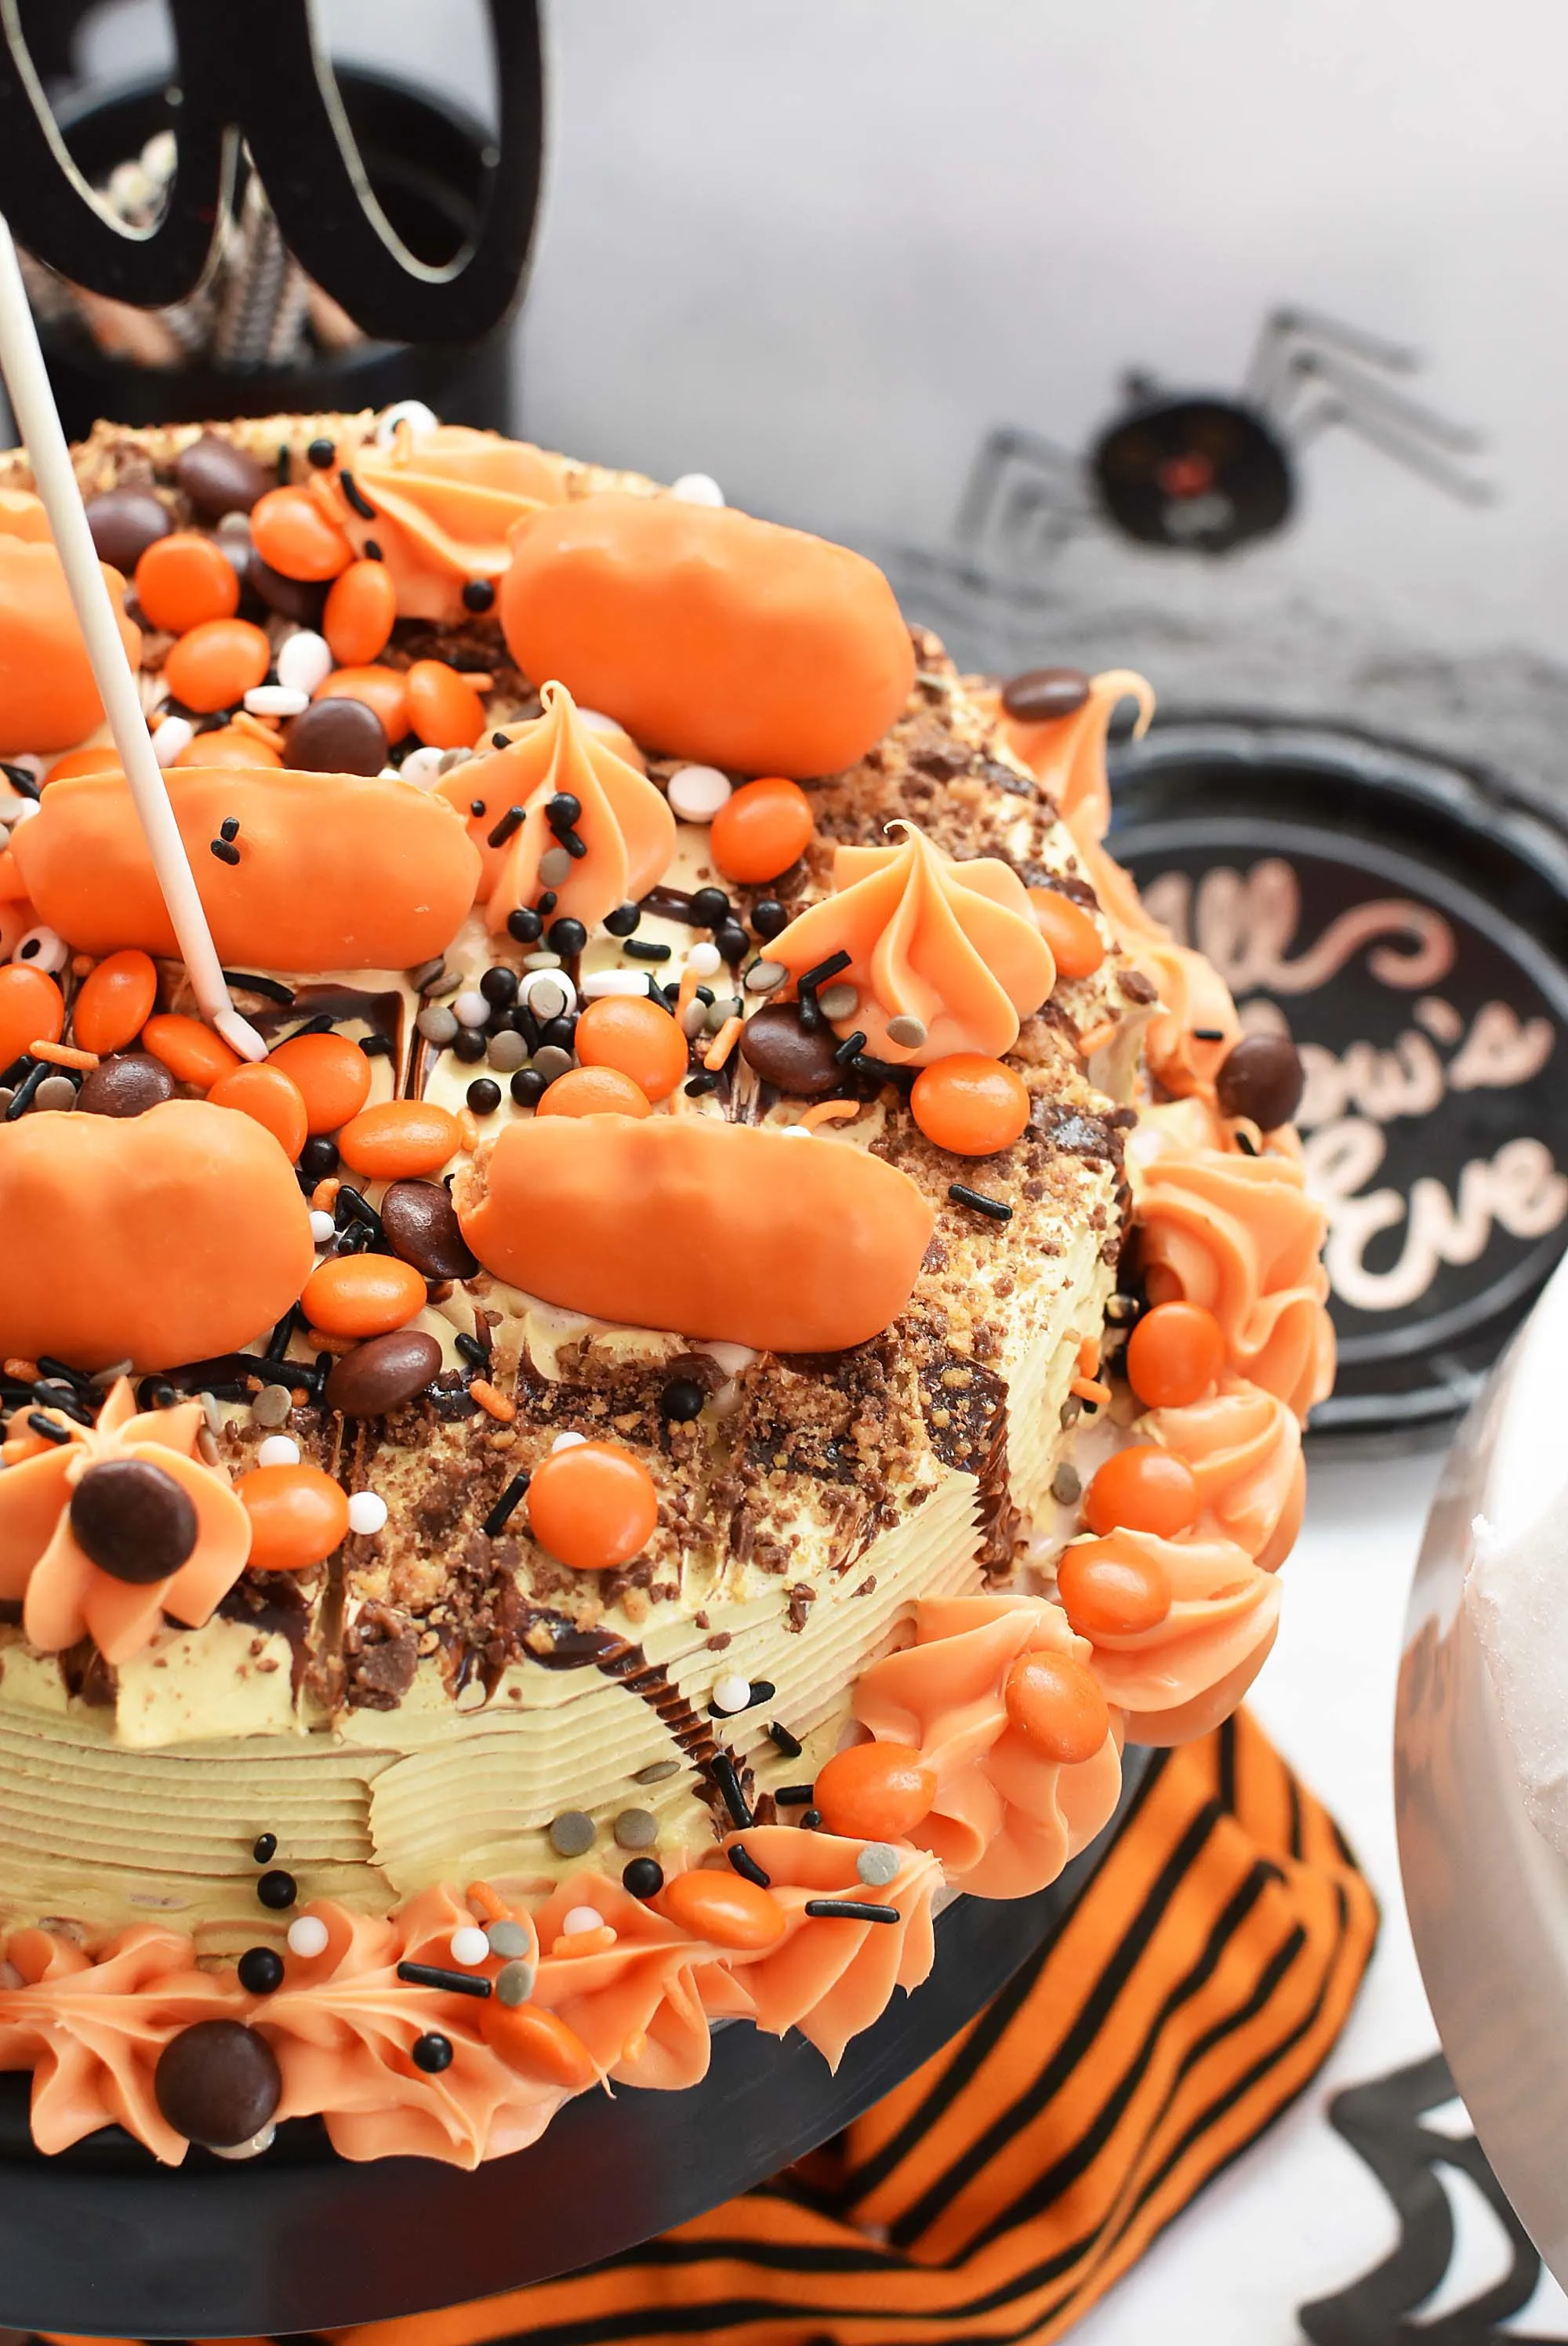 Ice Cream Cake Decorated with Pumpkins